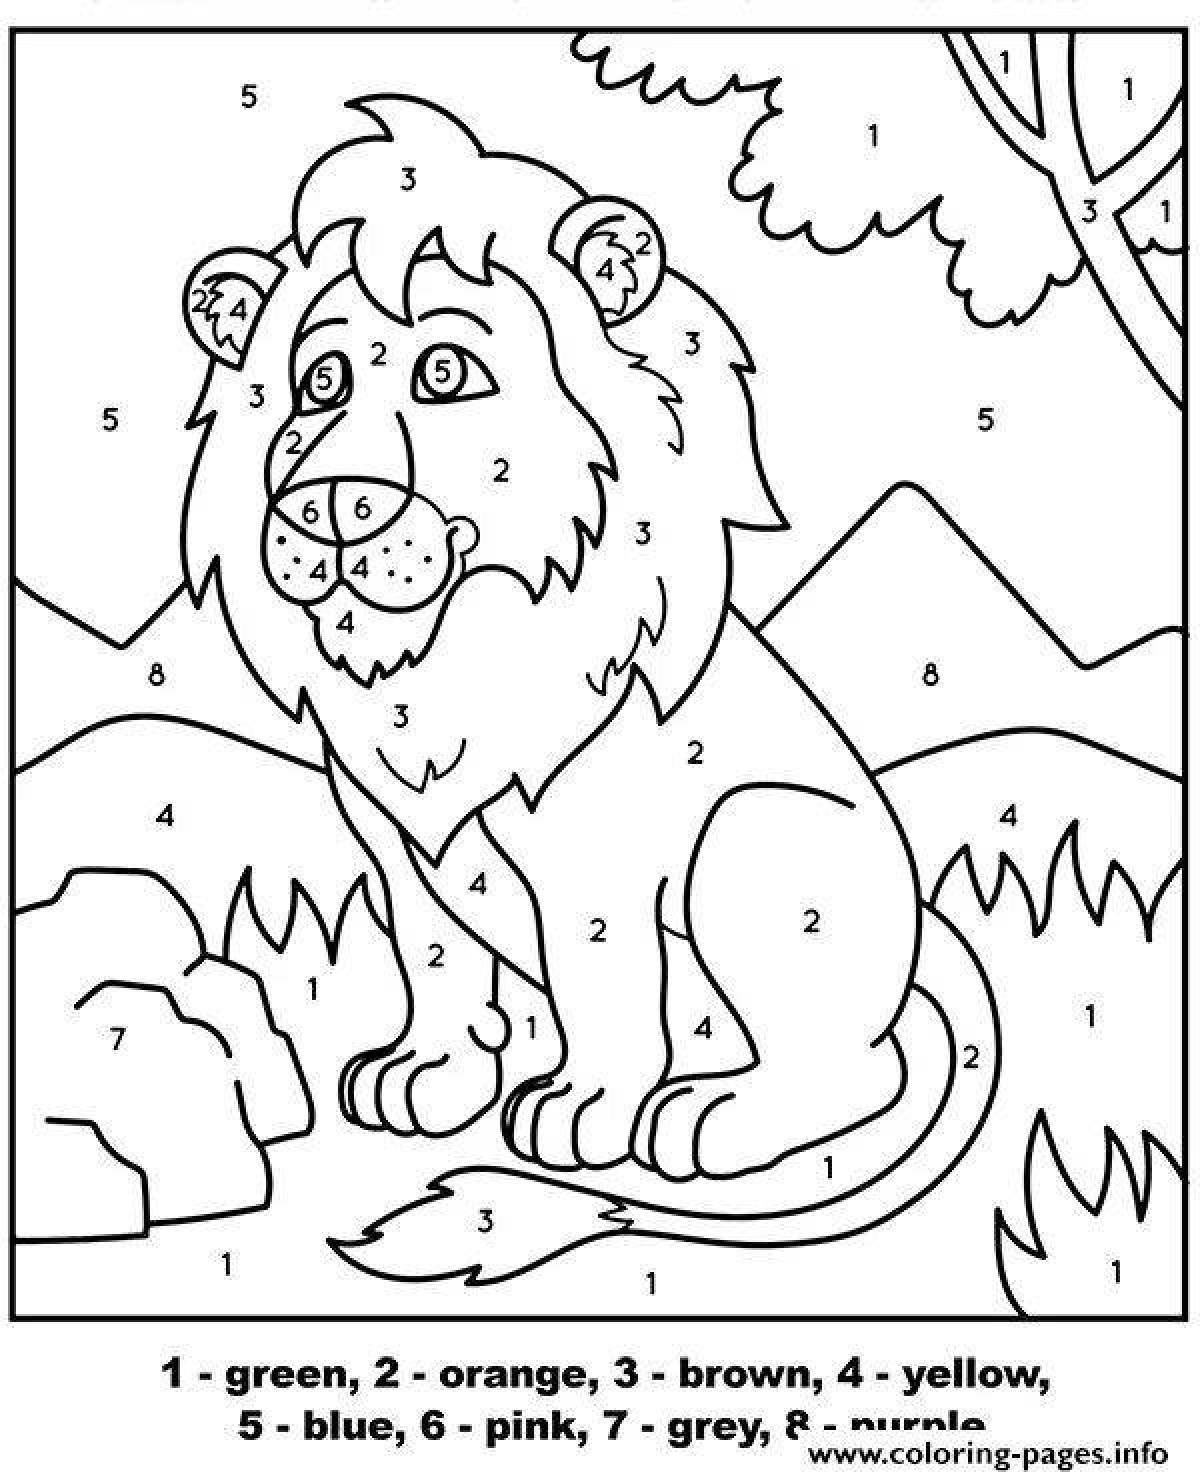 Coloring pages animals by numbers